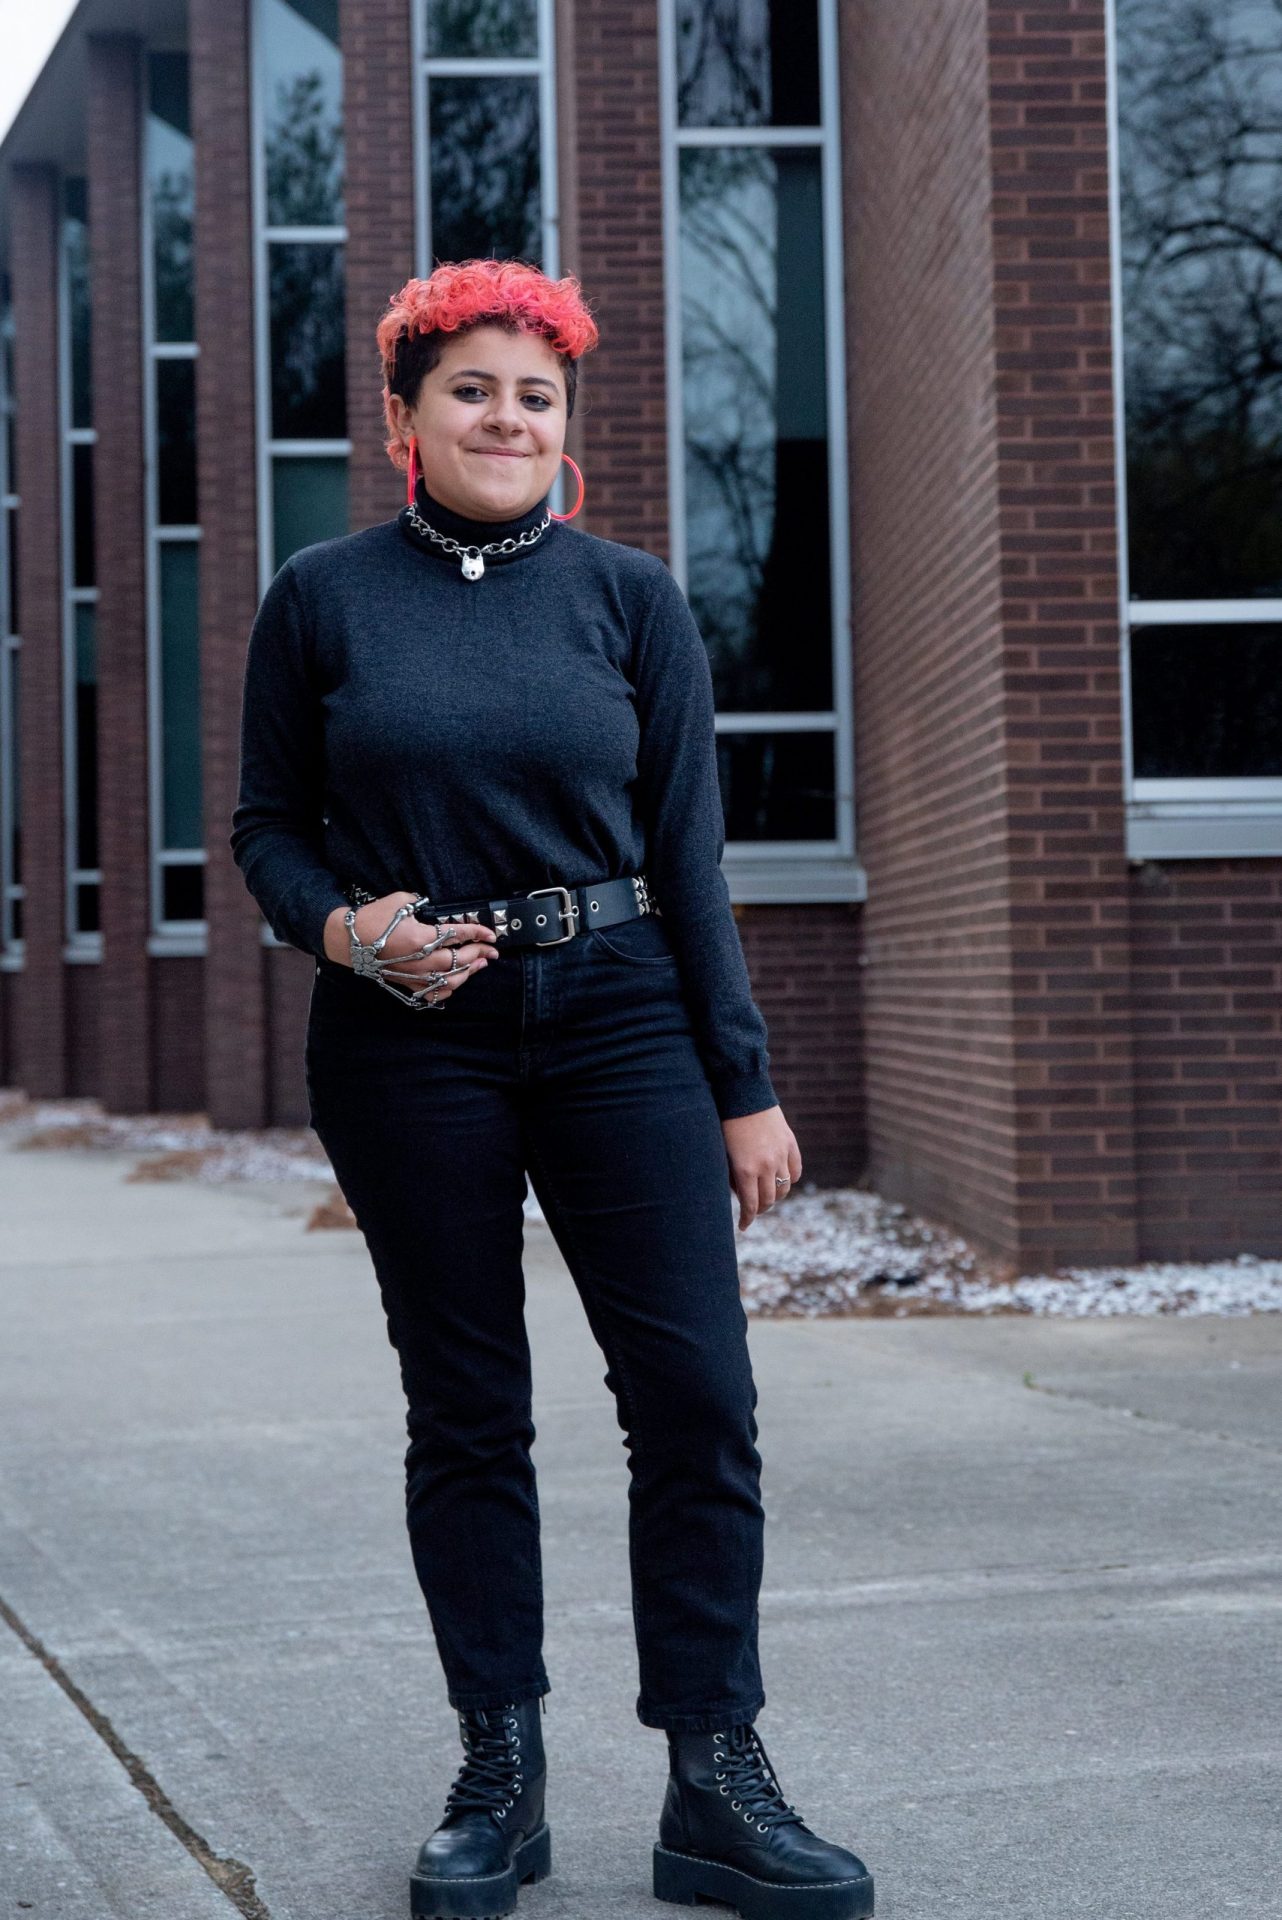 Nyds poses outside of Wilson Hall with bright orange hair that matches their hoop earrings.